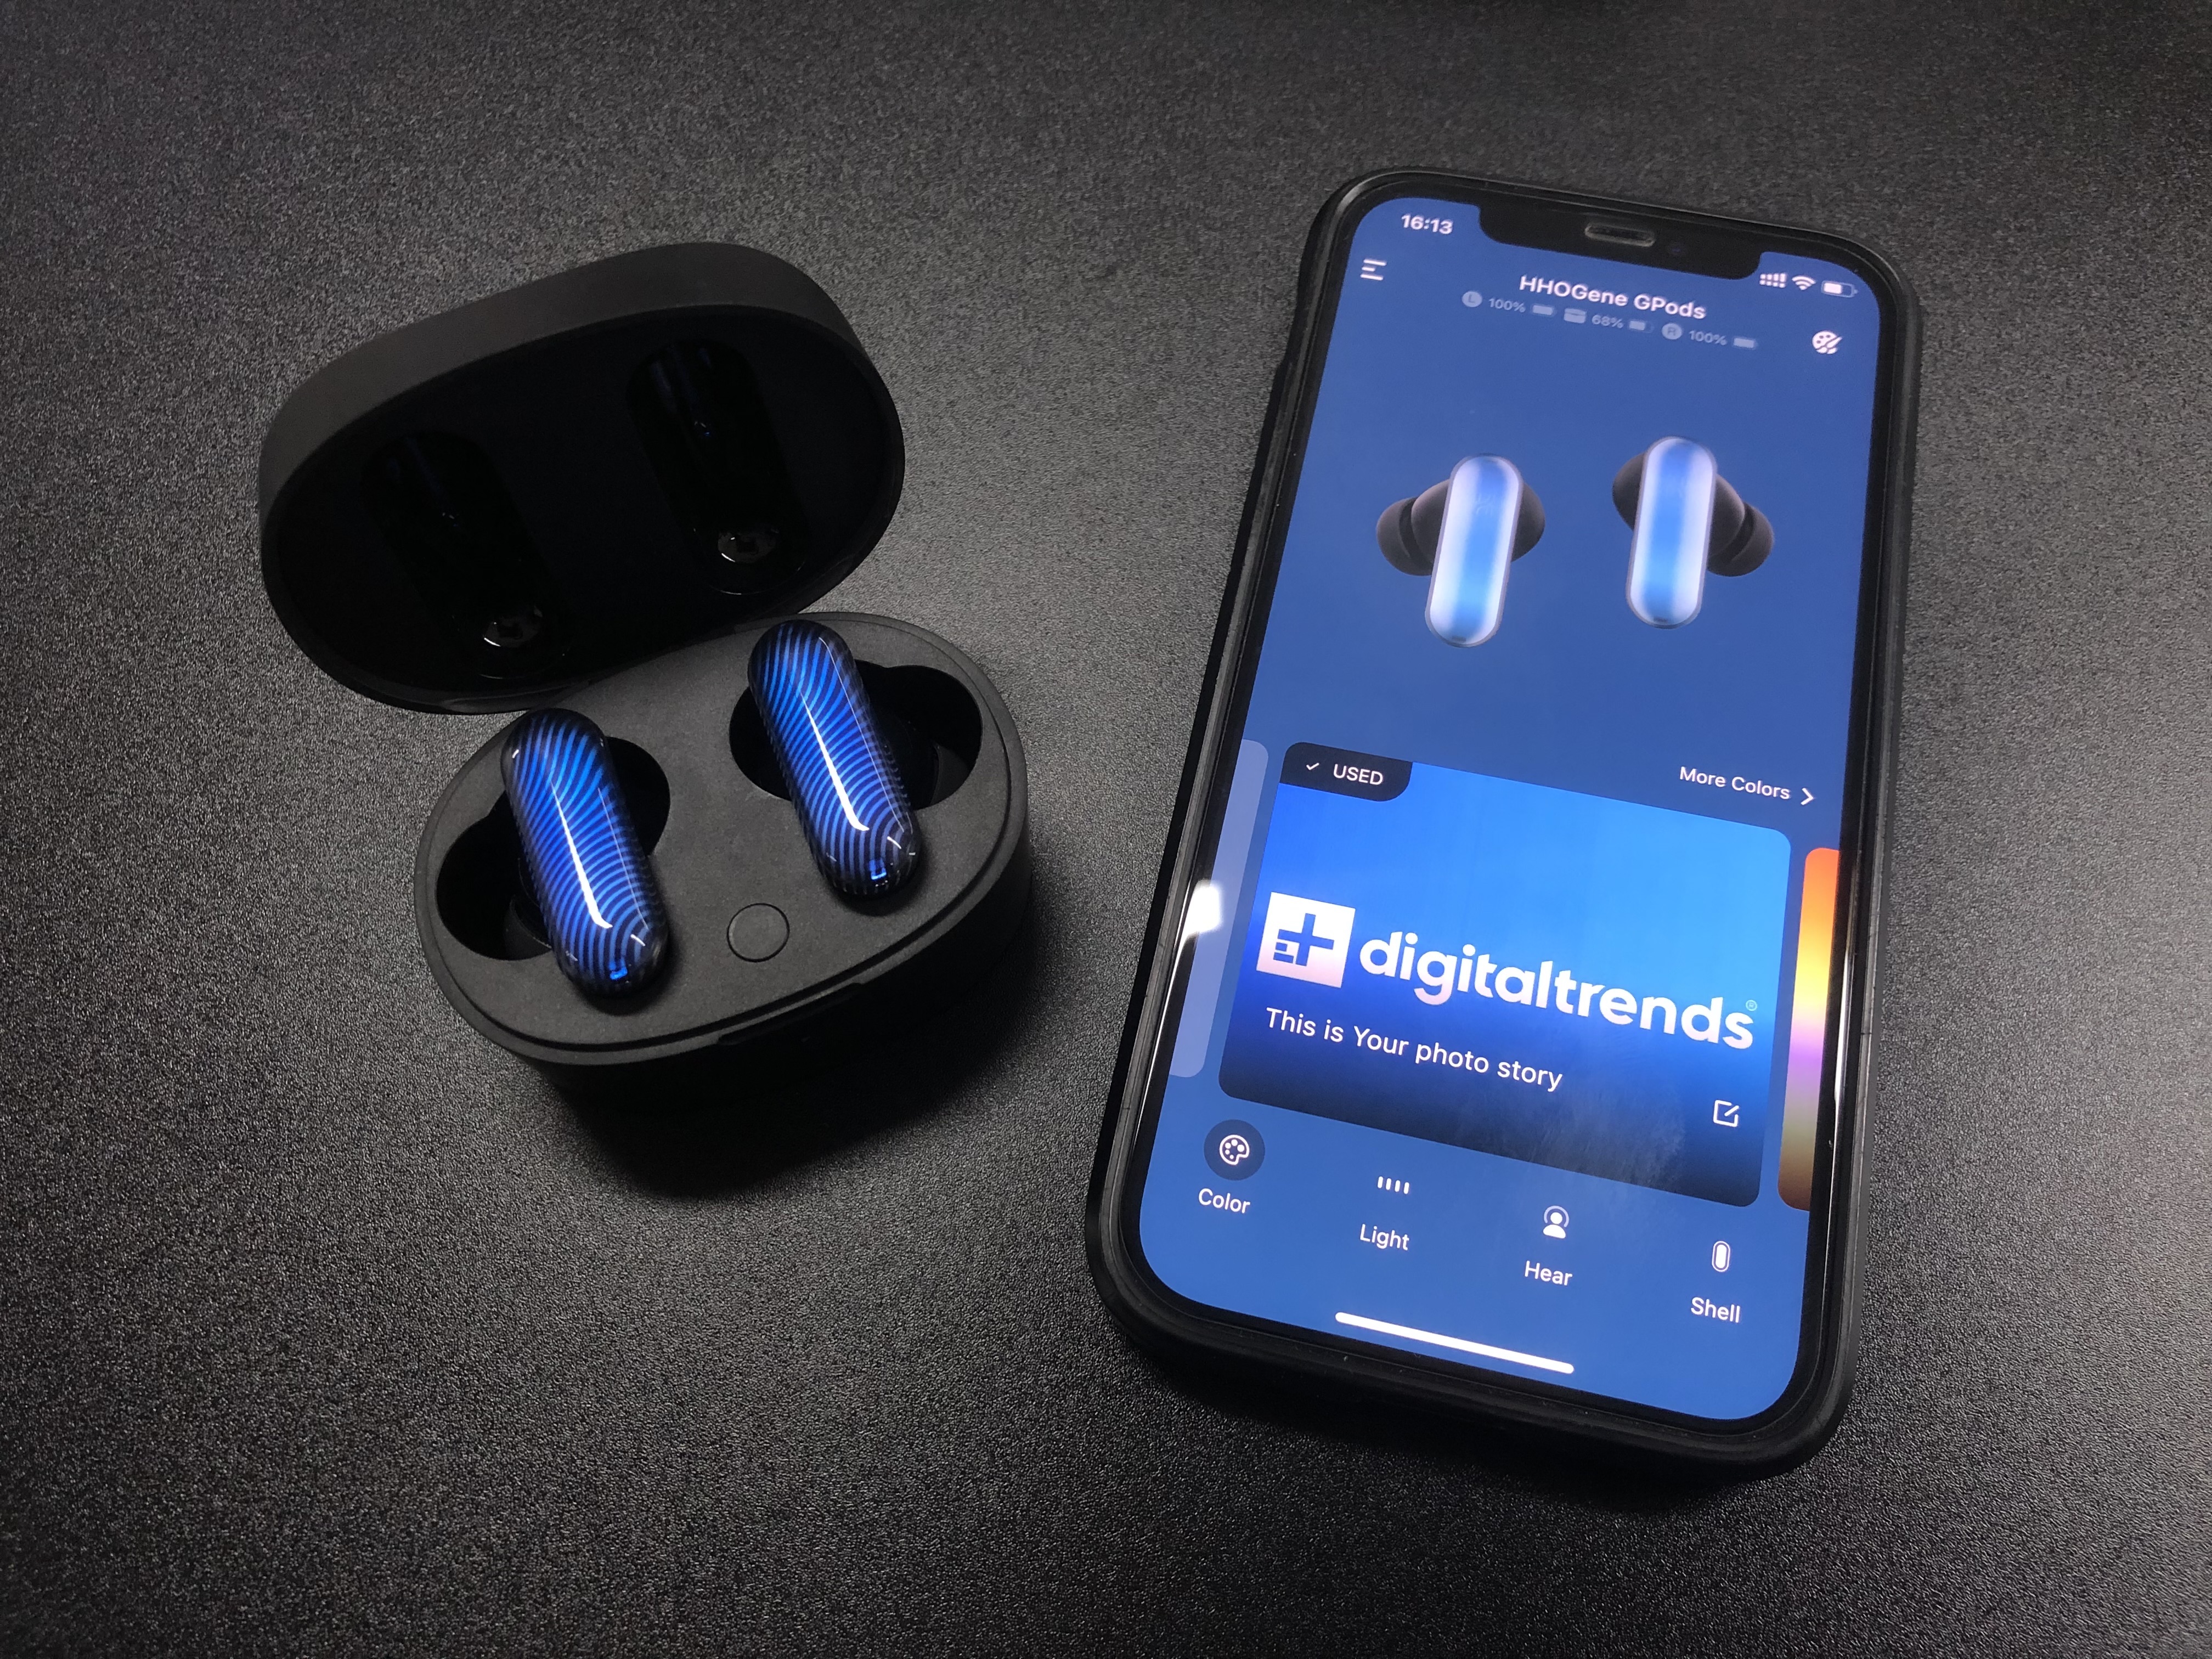 HHOGene GPods with mobile app and Digital Trends featured lit up blue.